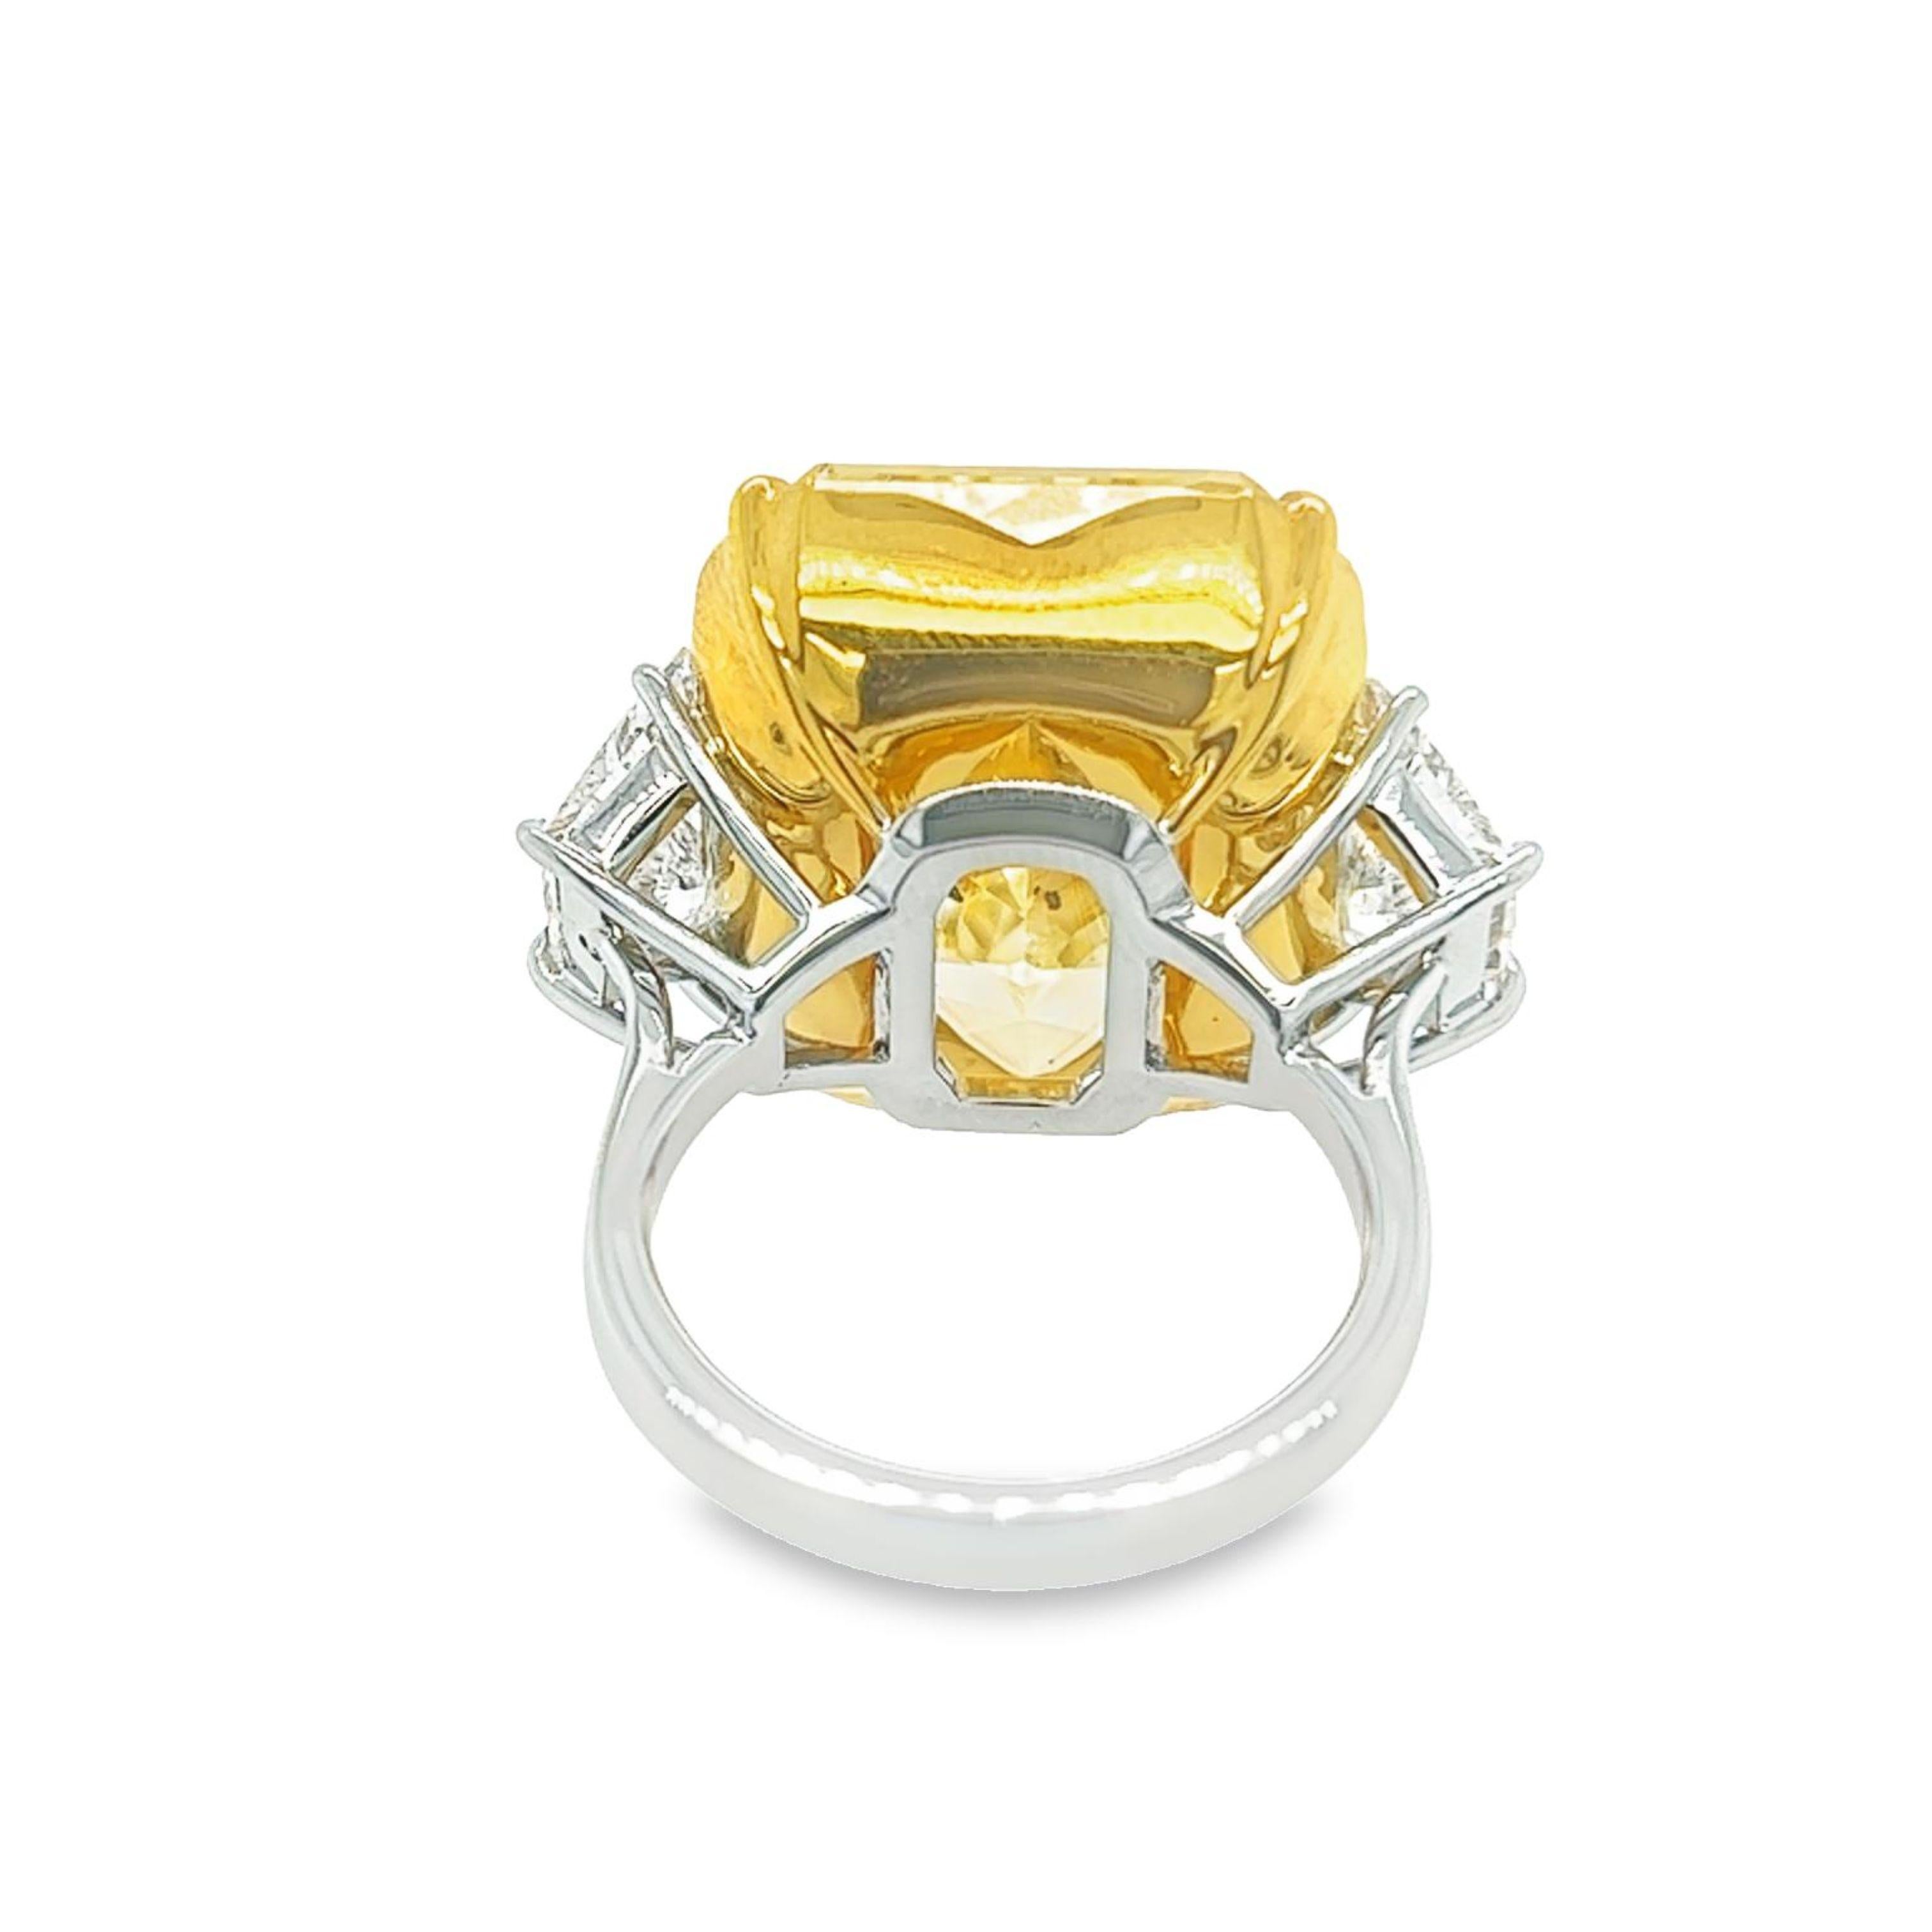 David Rosenberg 32.01 Carat Radiant Fancy Yellow GIA Diamond Engagement Ring In New Condition For Sale In Boca Raton, FL